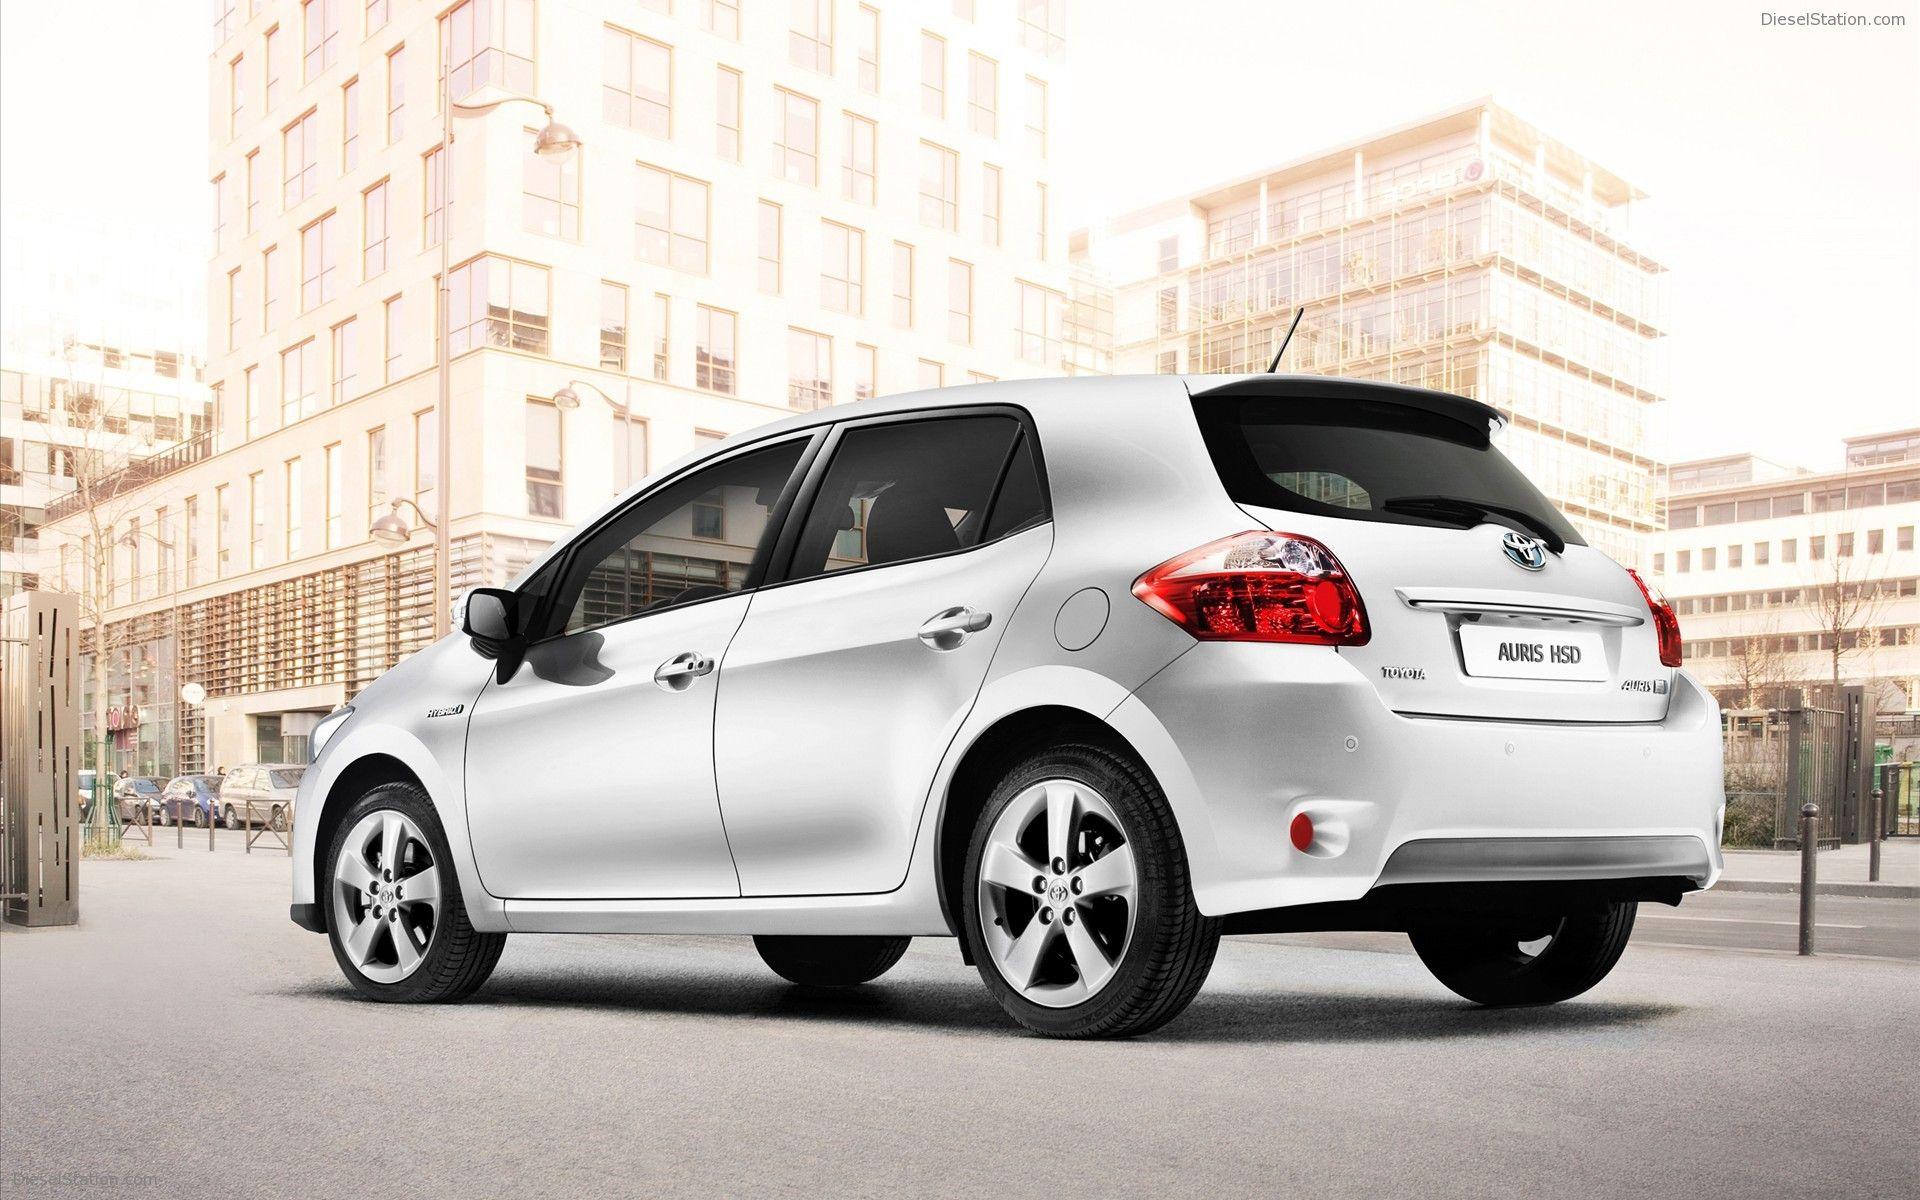 Toyota Auris HSD Widescreen Exotic Car Wallpapers of